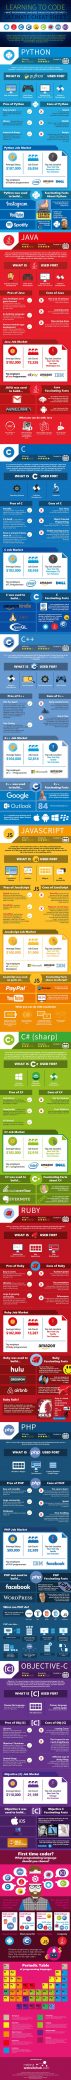 Should You Learn Python, C, or Ruby to Be a Top Coder? [Infographic]